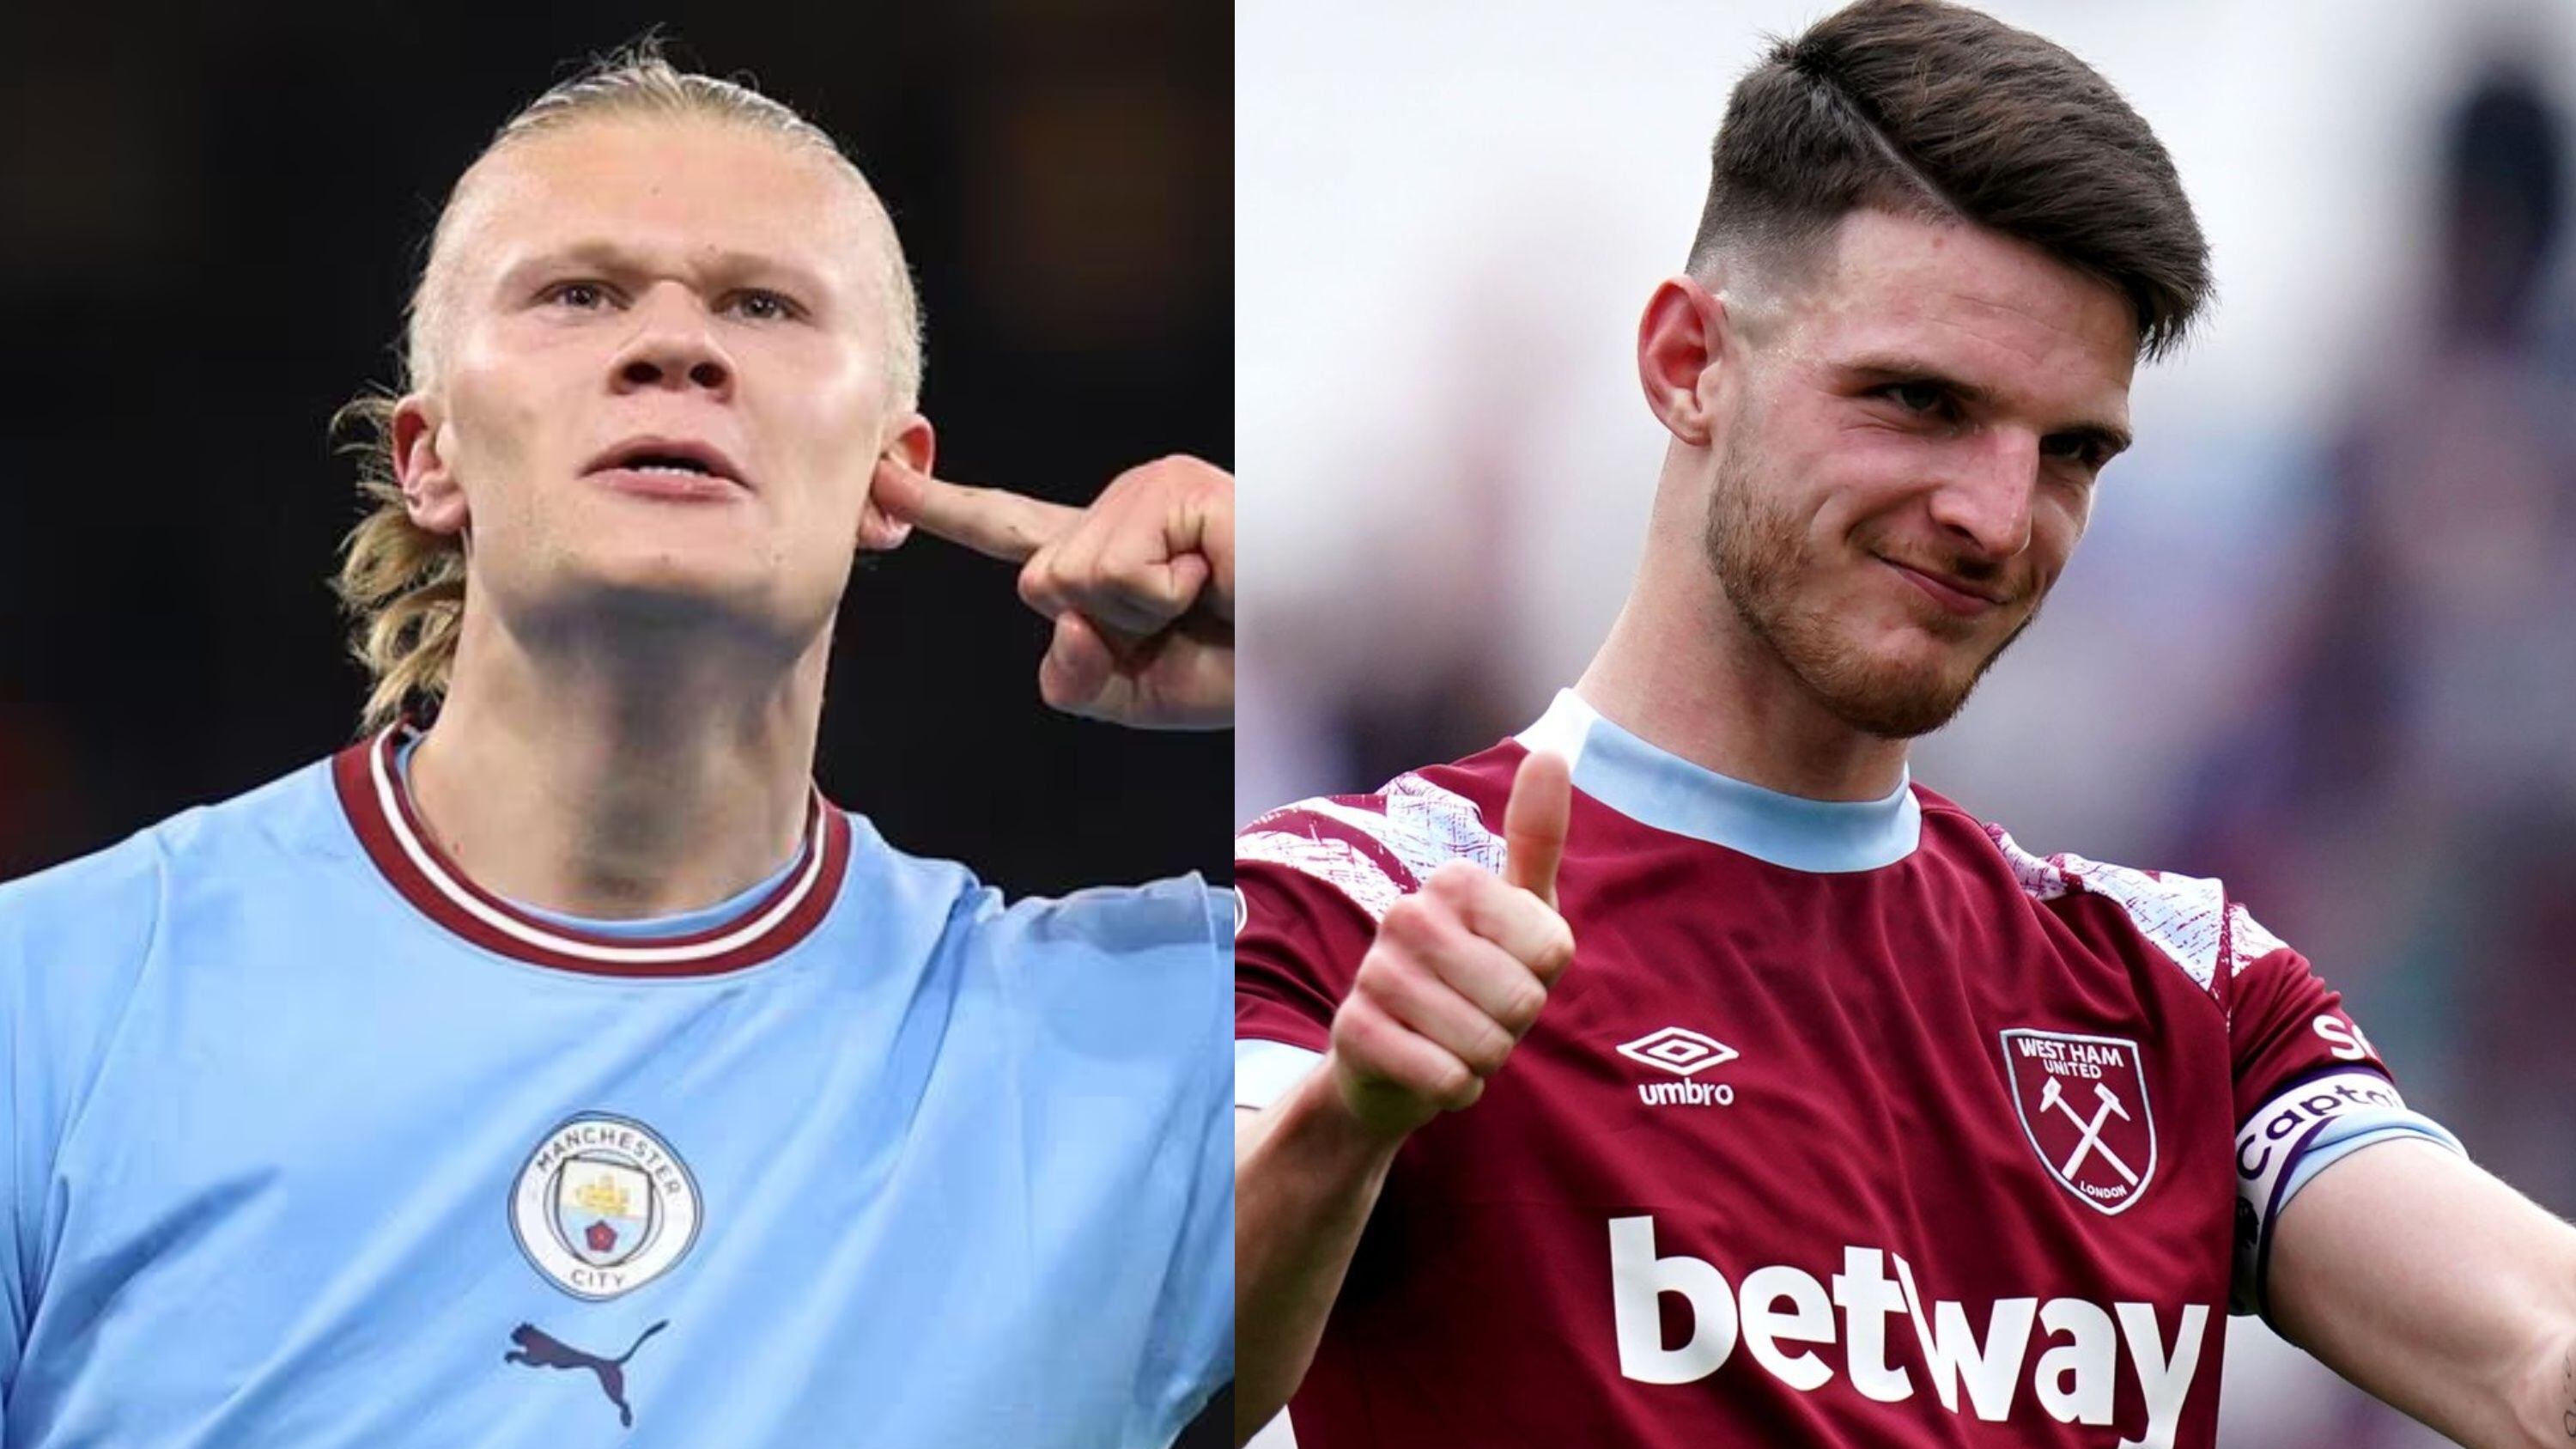 Nor with Haaland, the luxury that awaits Declan Rice if he signs for Manchester City